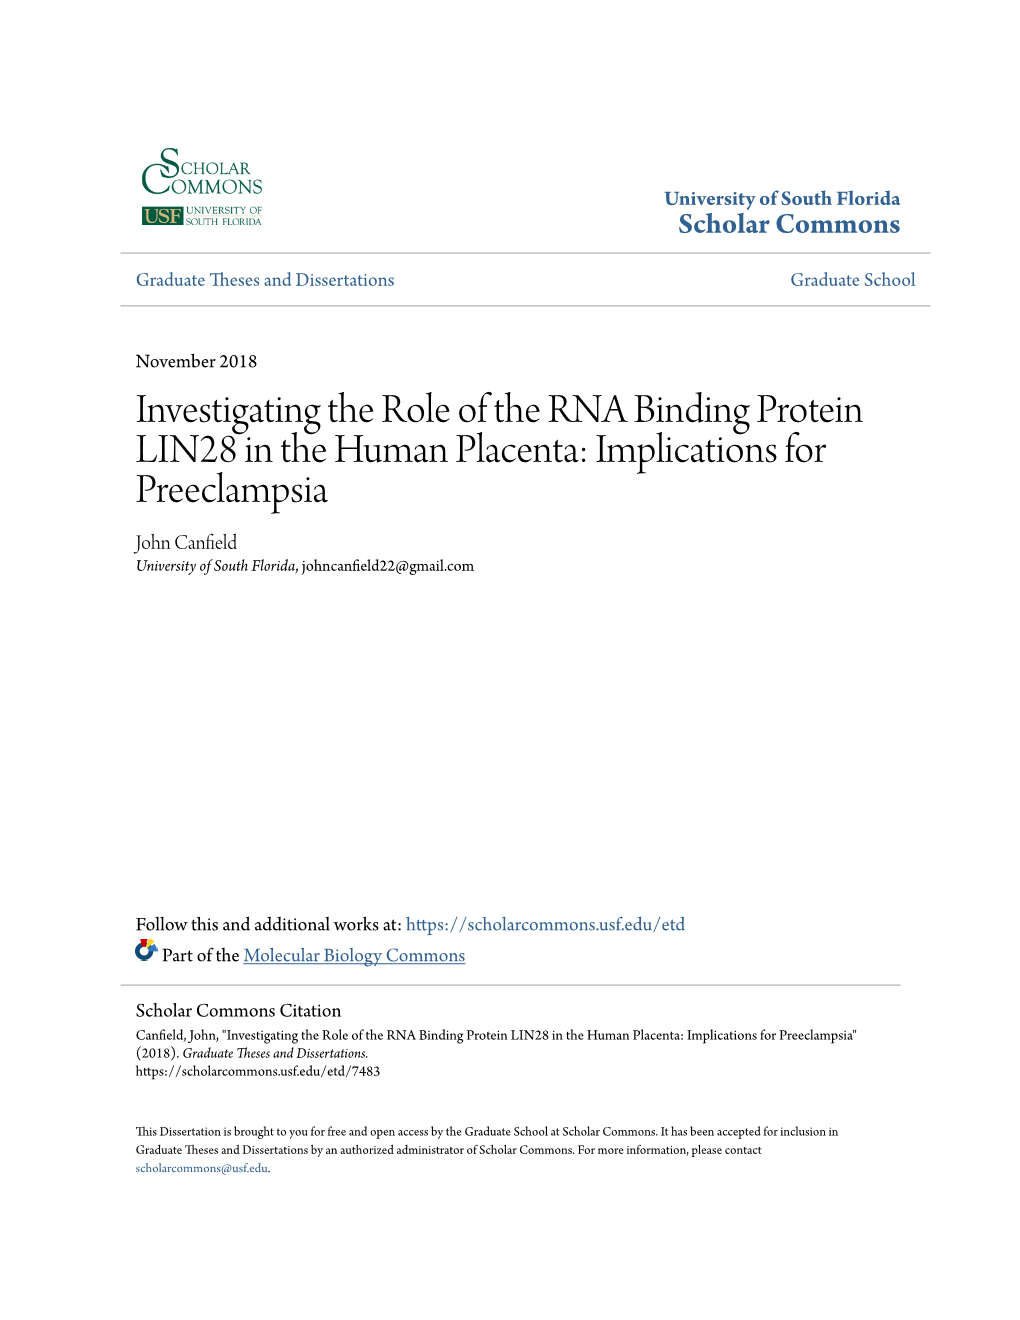 Investigating the Role of the RNA Binding Protein LIN28 in The